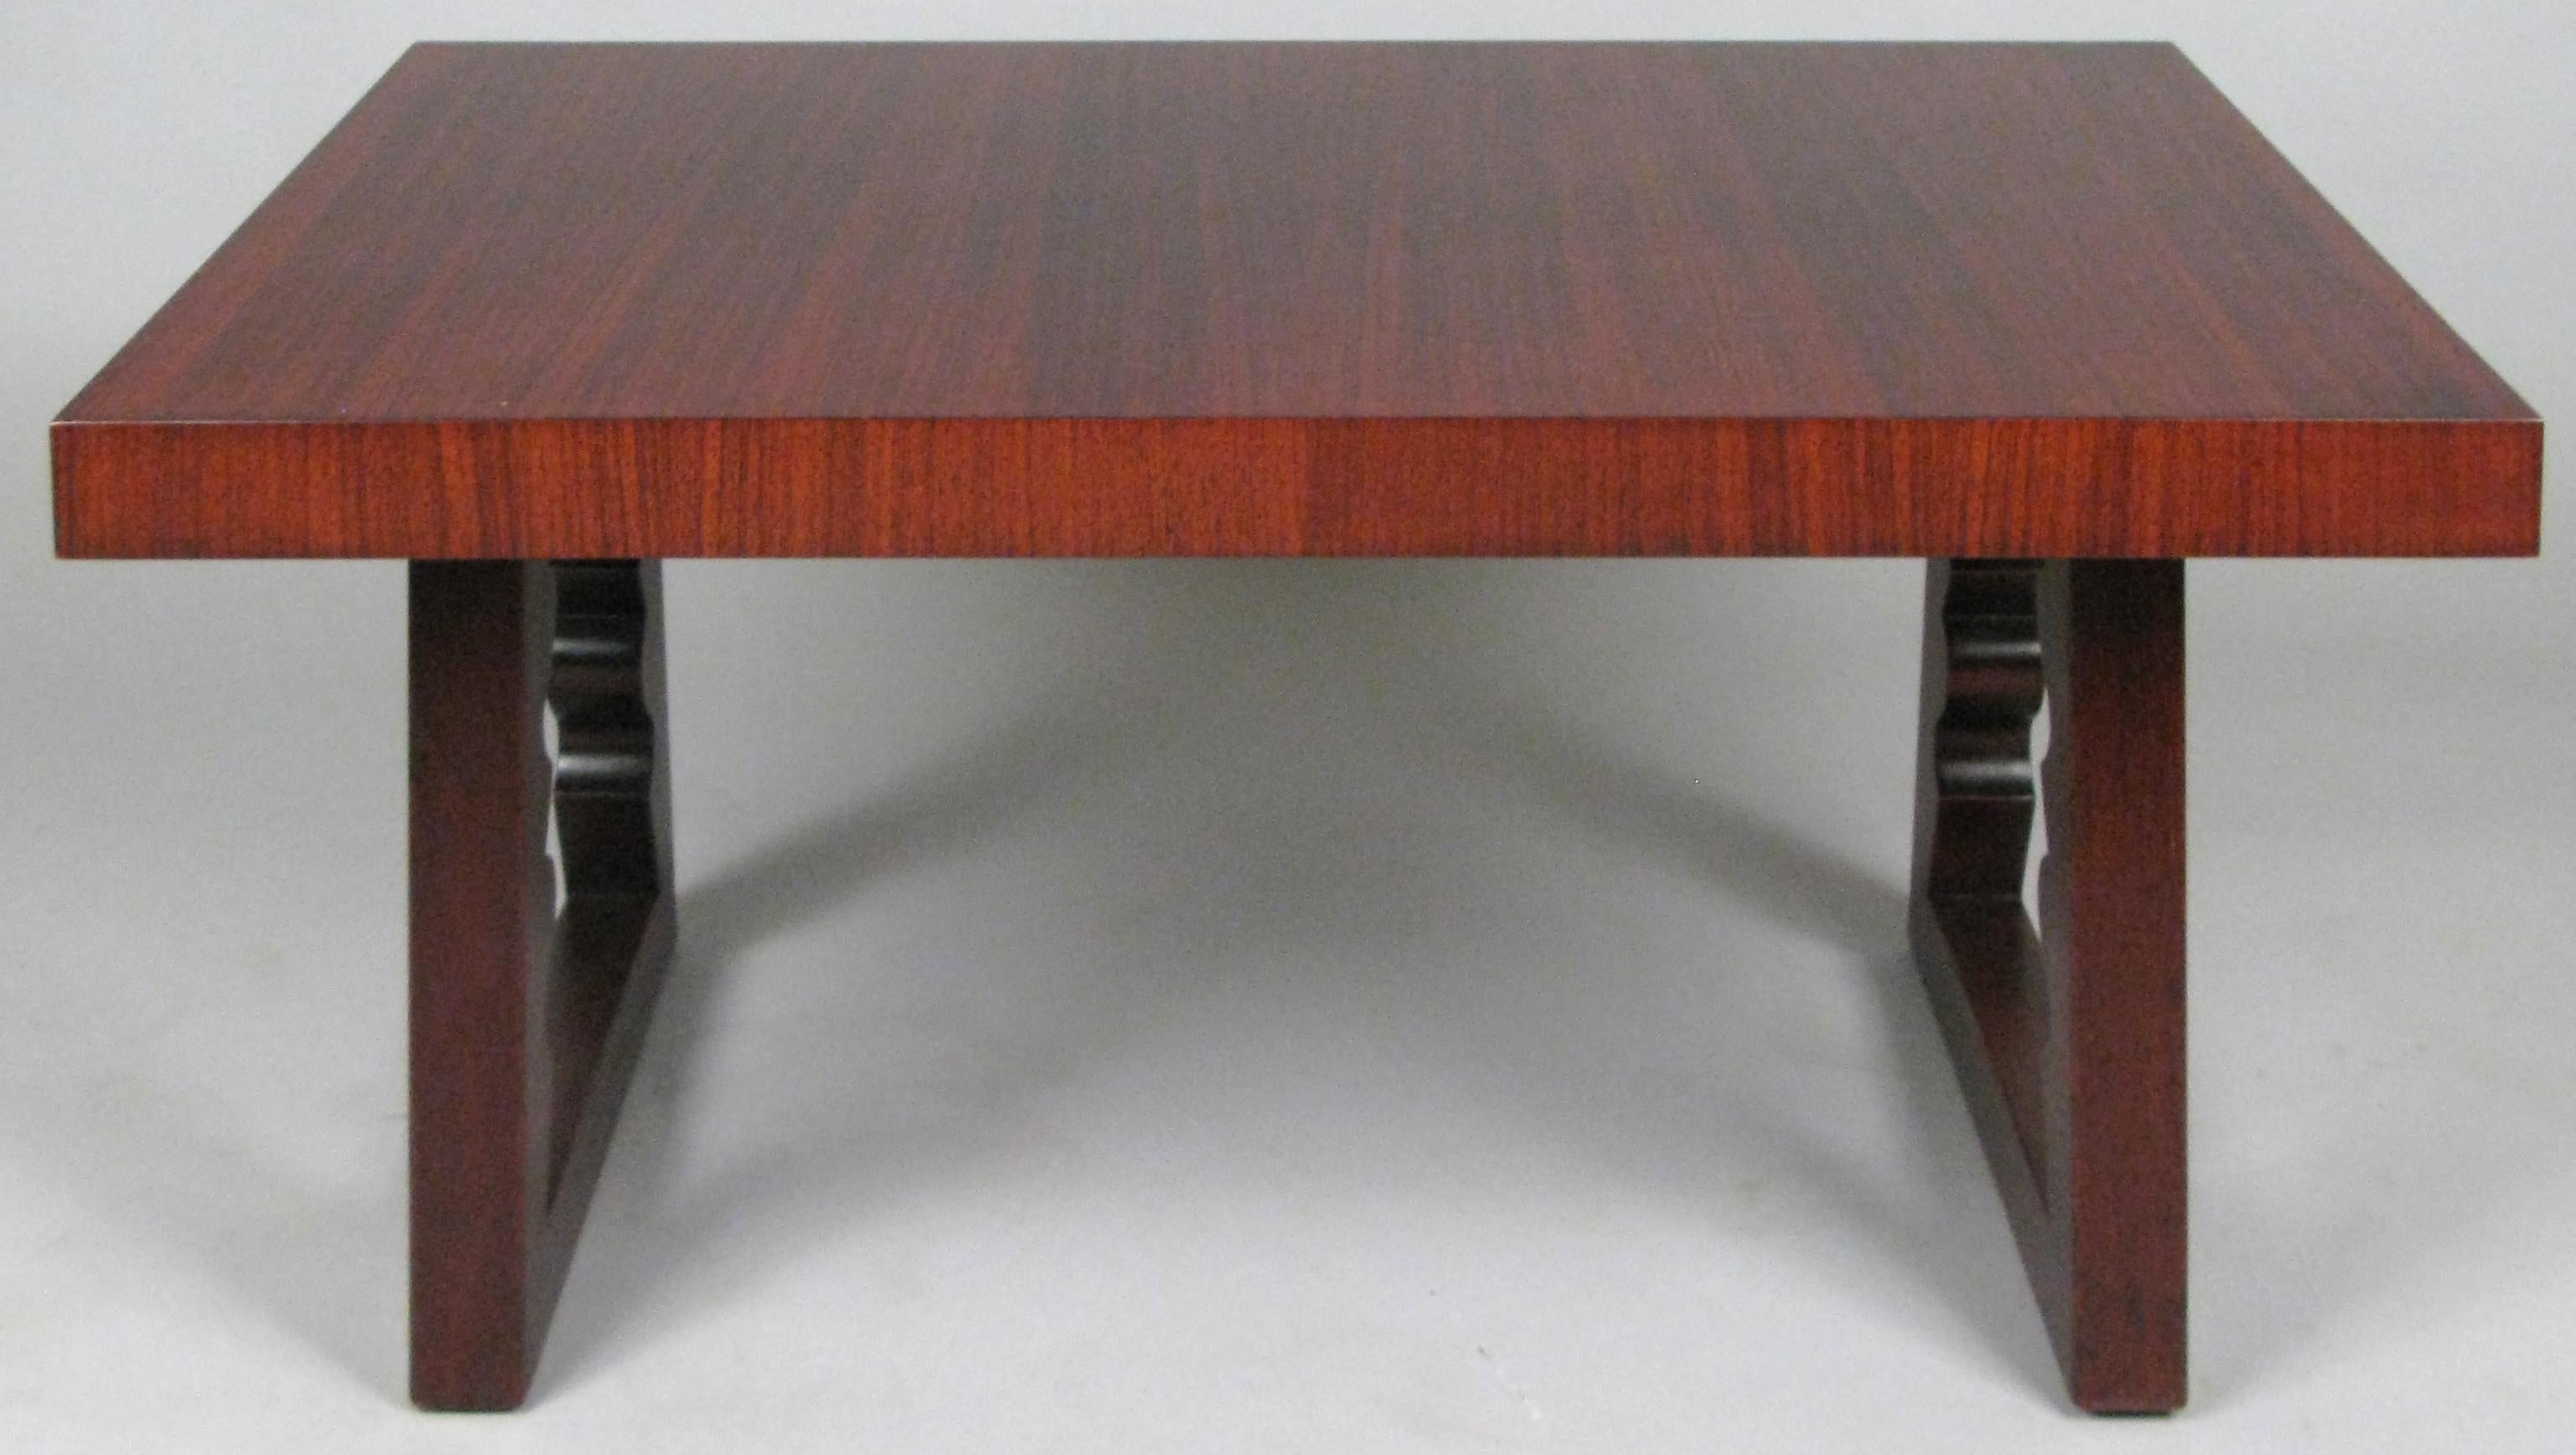 A beautifully detailed rosewood cocktail table designed by Andrew Szoeke, circa 1948. With a rectangular top and mahogany bases with sculpted details on the interior of the legs. Gorgeous rosewood graining.